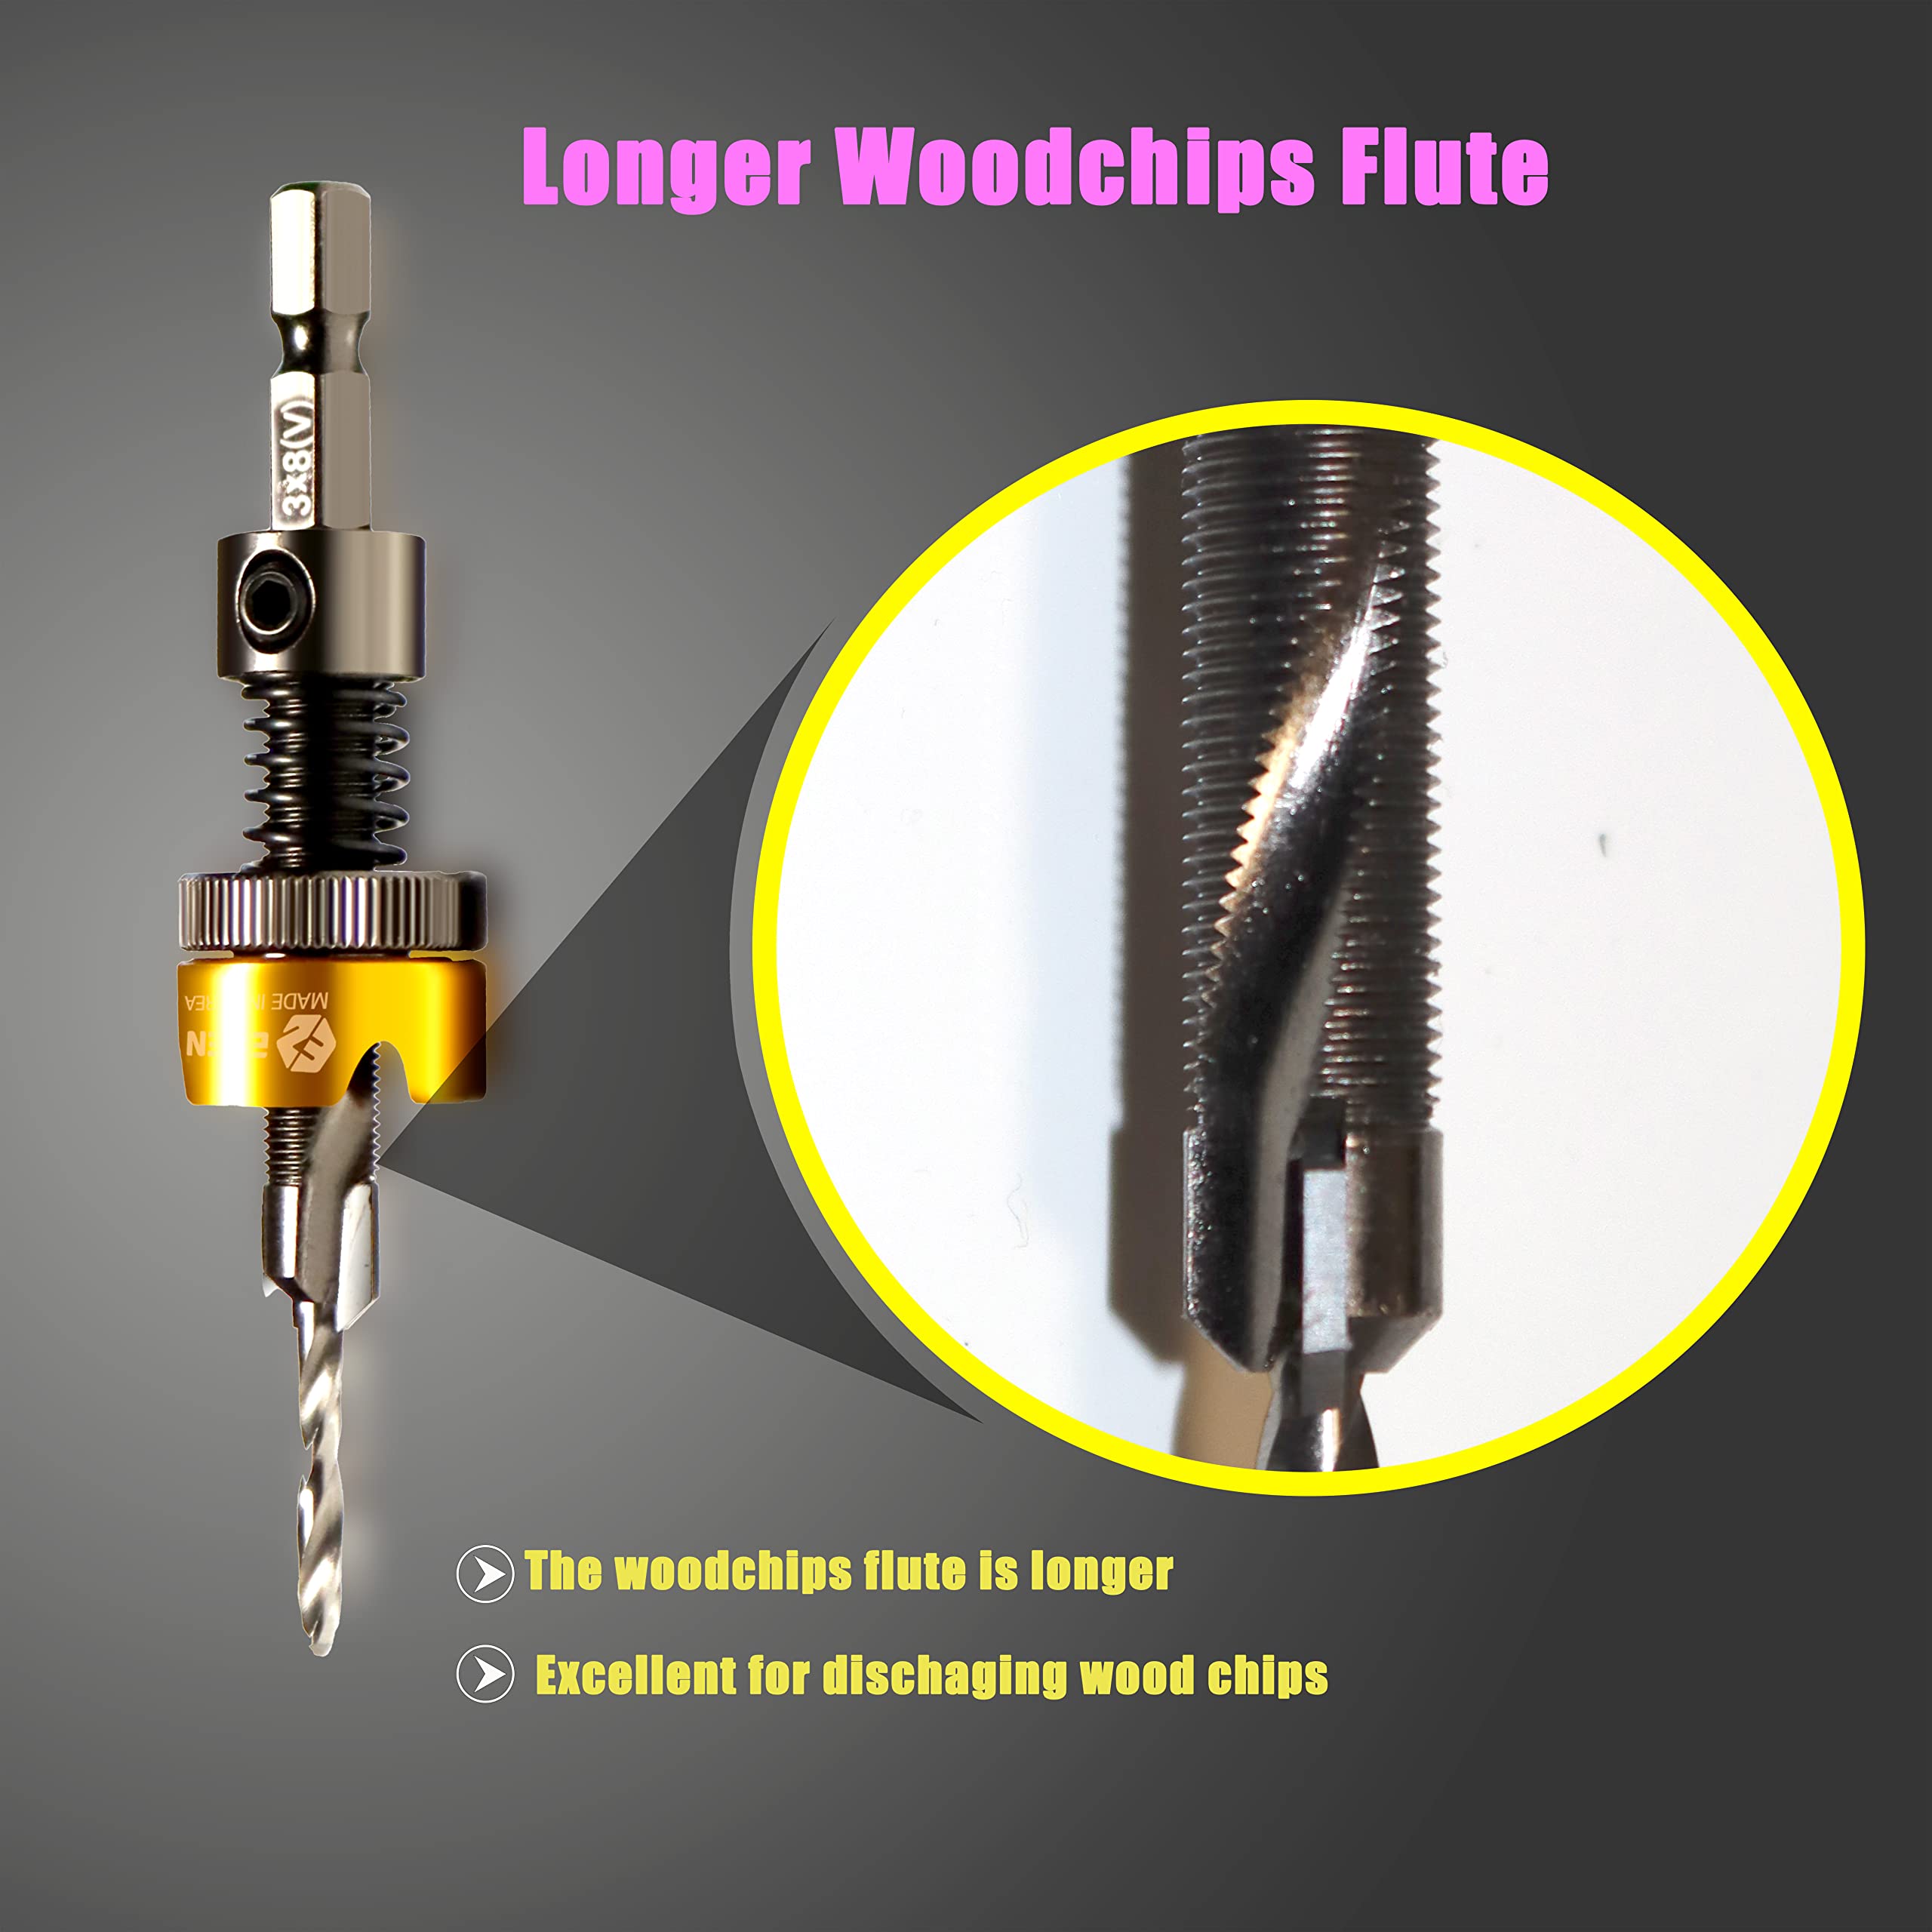 Adjustable Depth Countersink Drill Bit_Self-Adjusting Depth Control Without Wrench, Preventing Scratches Or Marks by Stopper Mounted Bearing, Tungsten Carbide Tipped Counterbore_5/32"x25/64" (4x10mm)